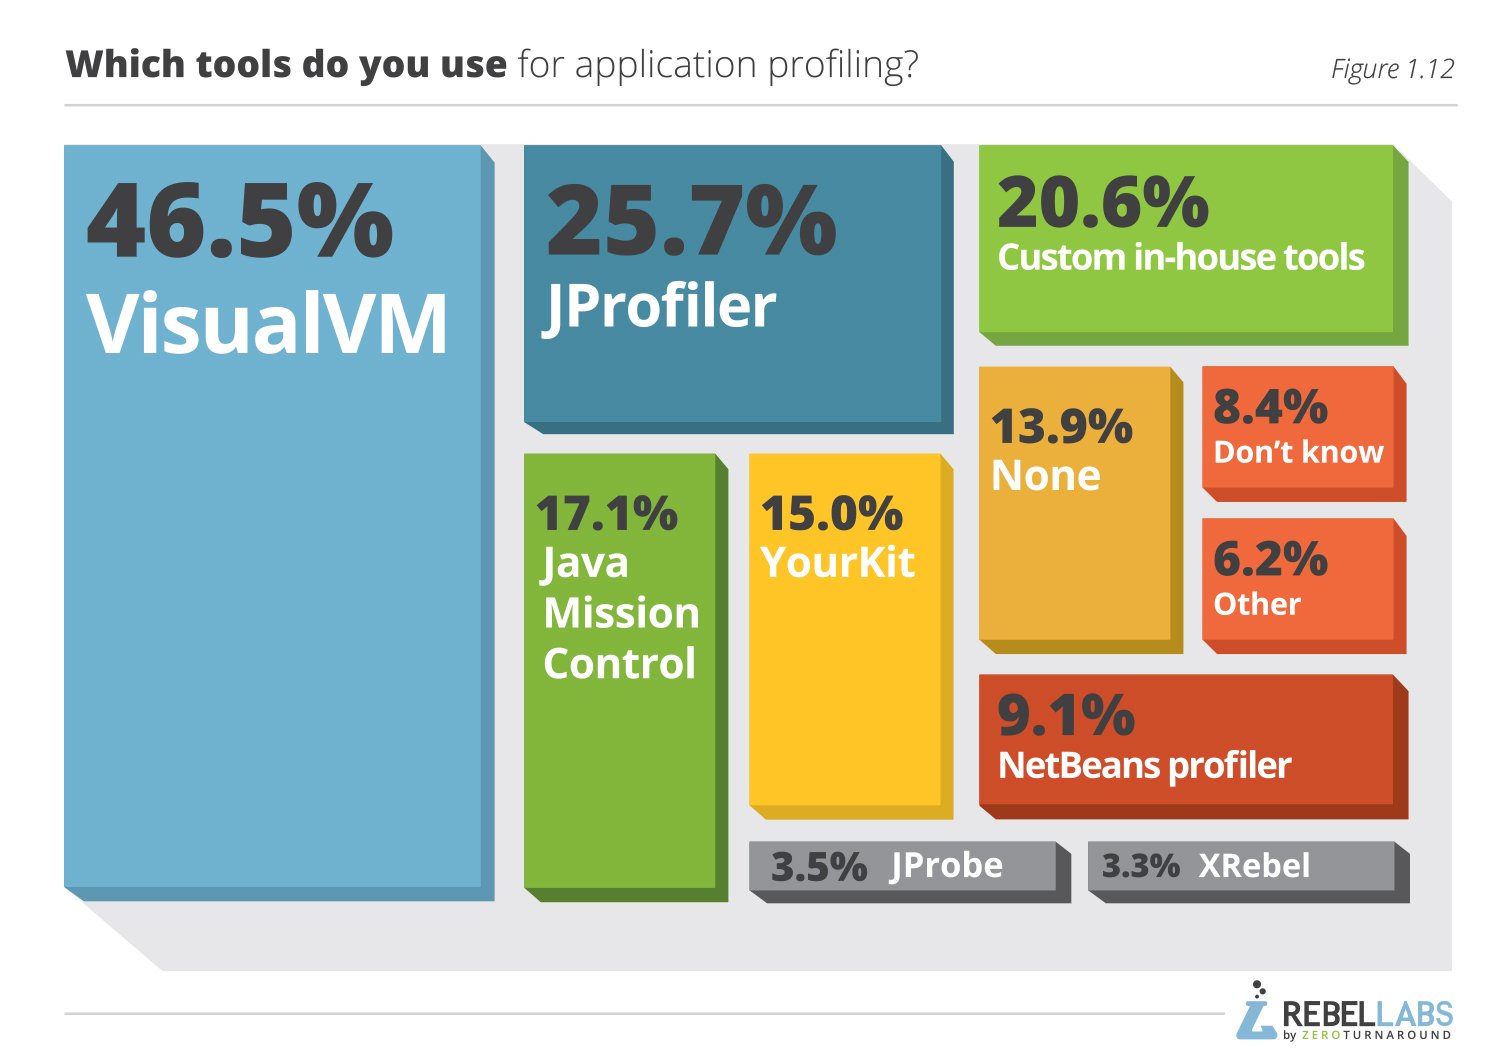 Tools for Application Profiling